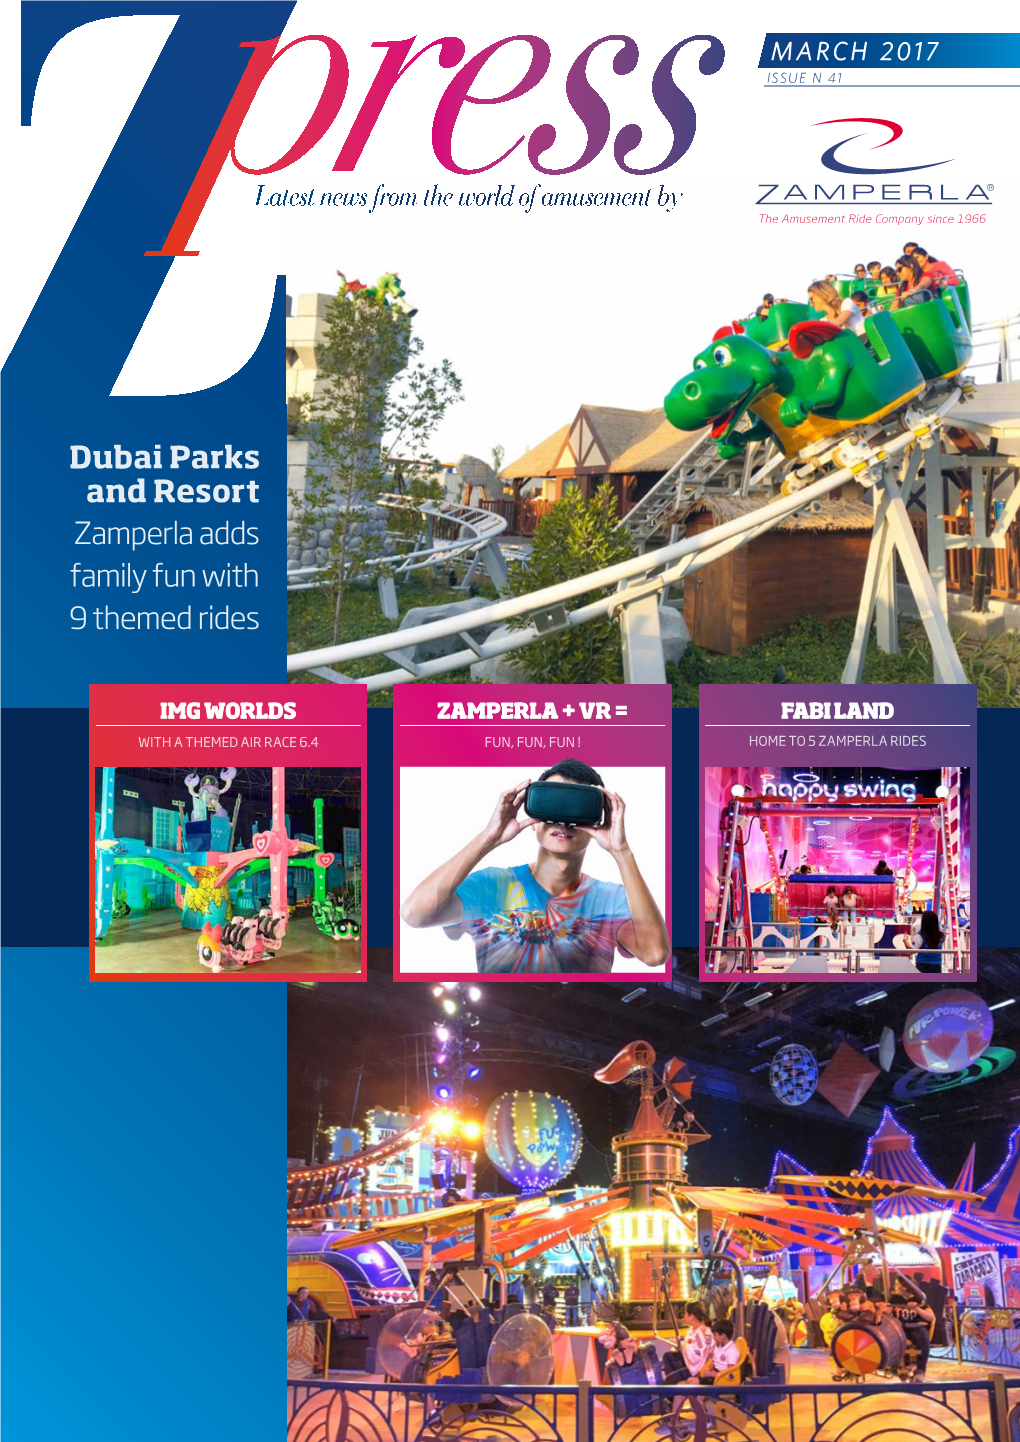 Dubai Parks and Resort Zamperla Adds Family Fun with 9 Themed Rides